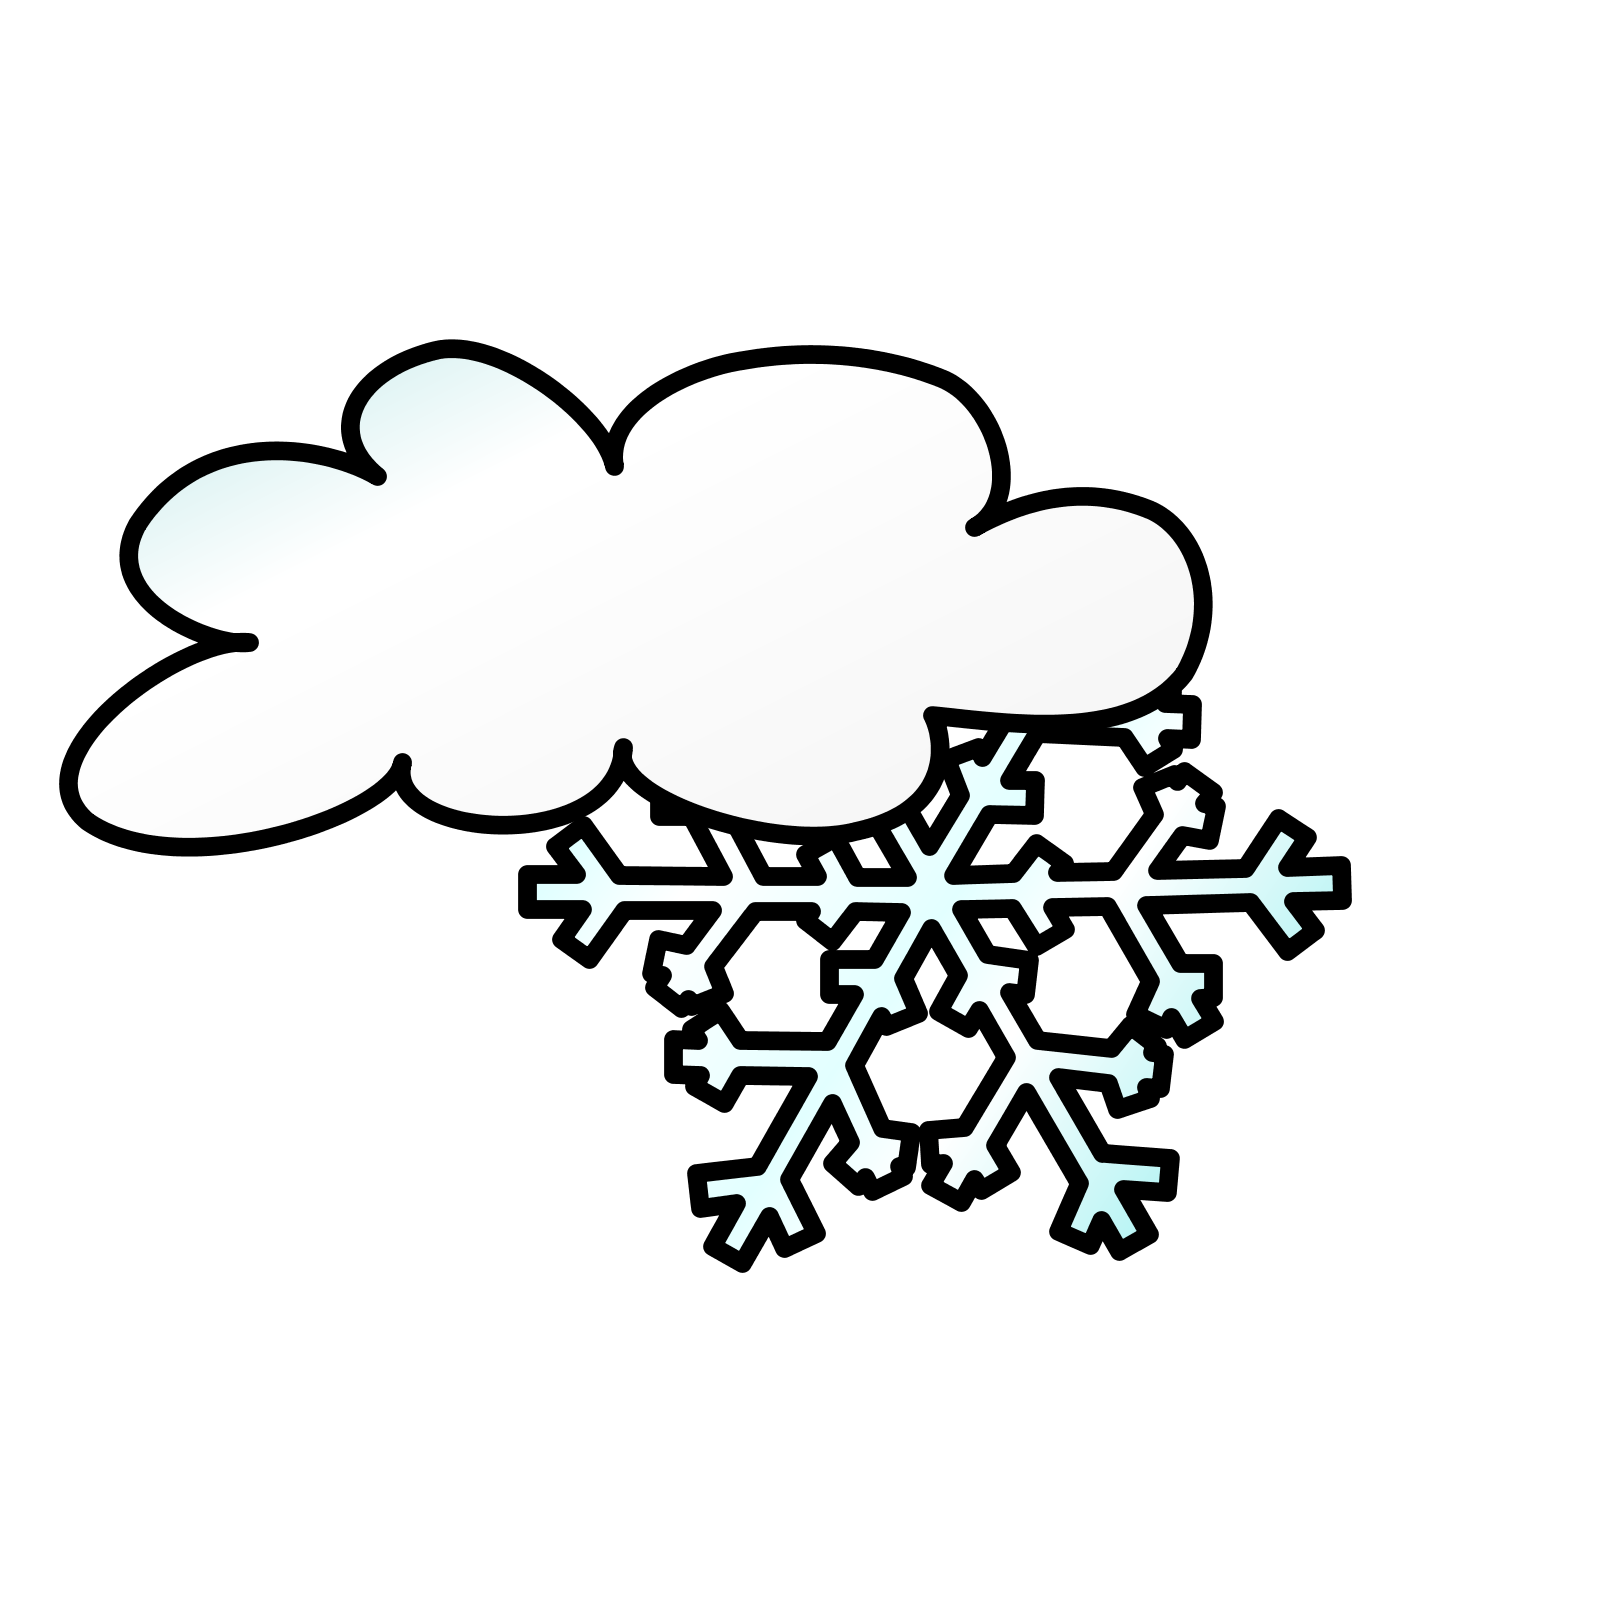 Free Weather Symbols Pictures, Download Free Clip Art, Free.